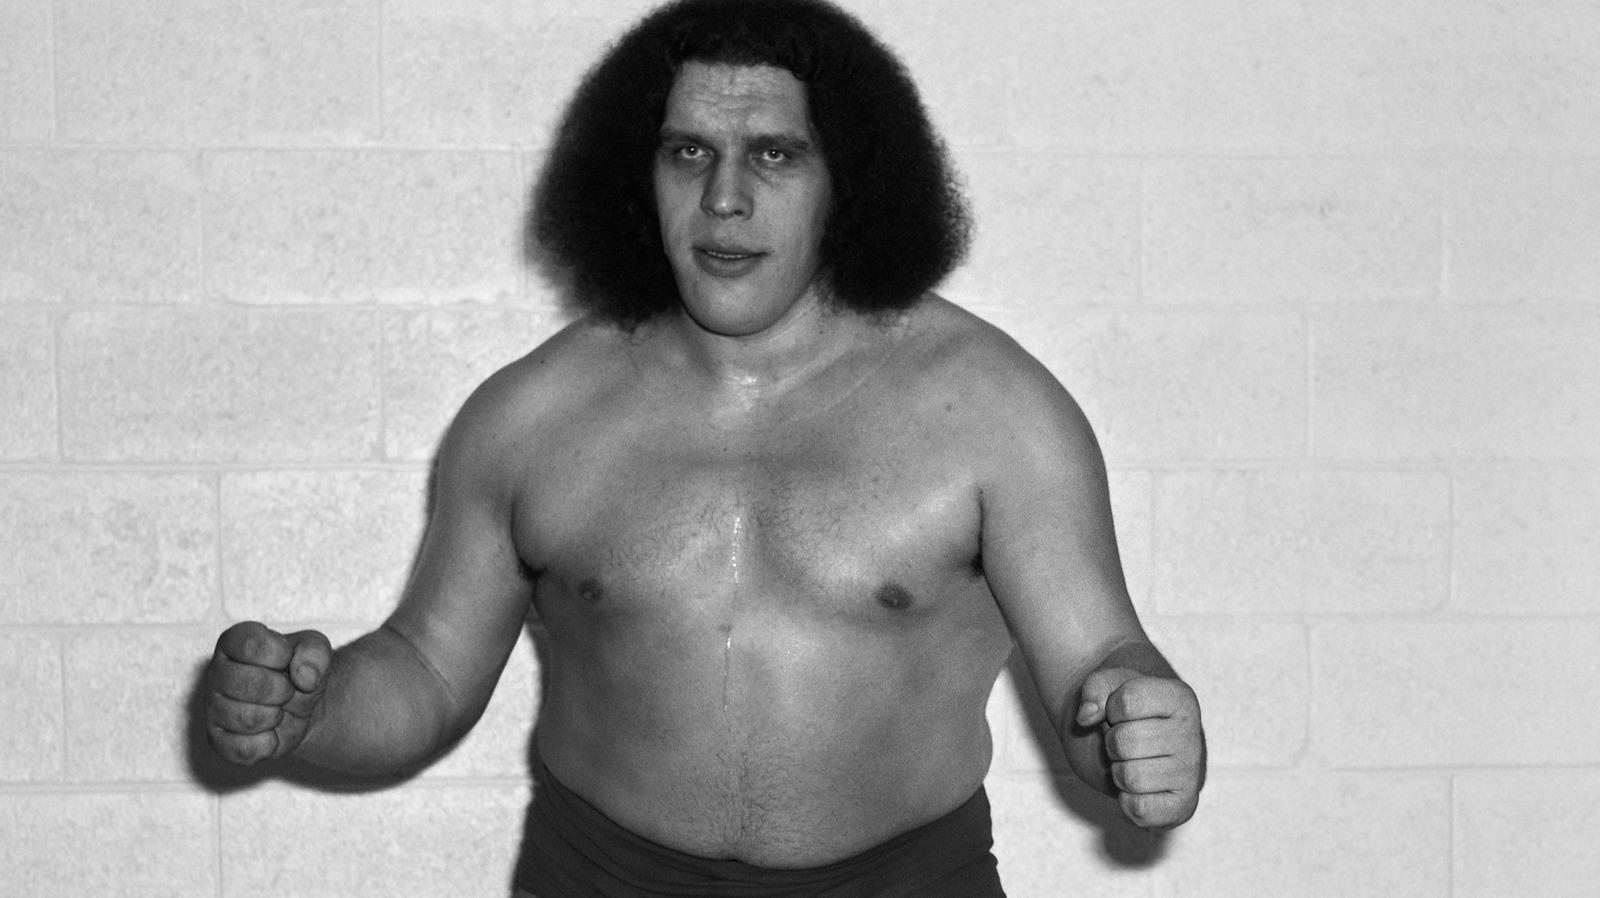 What Disease Did Andre the Giant Have